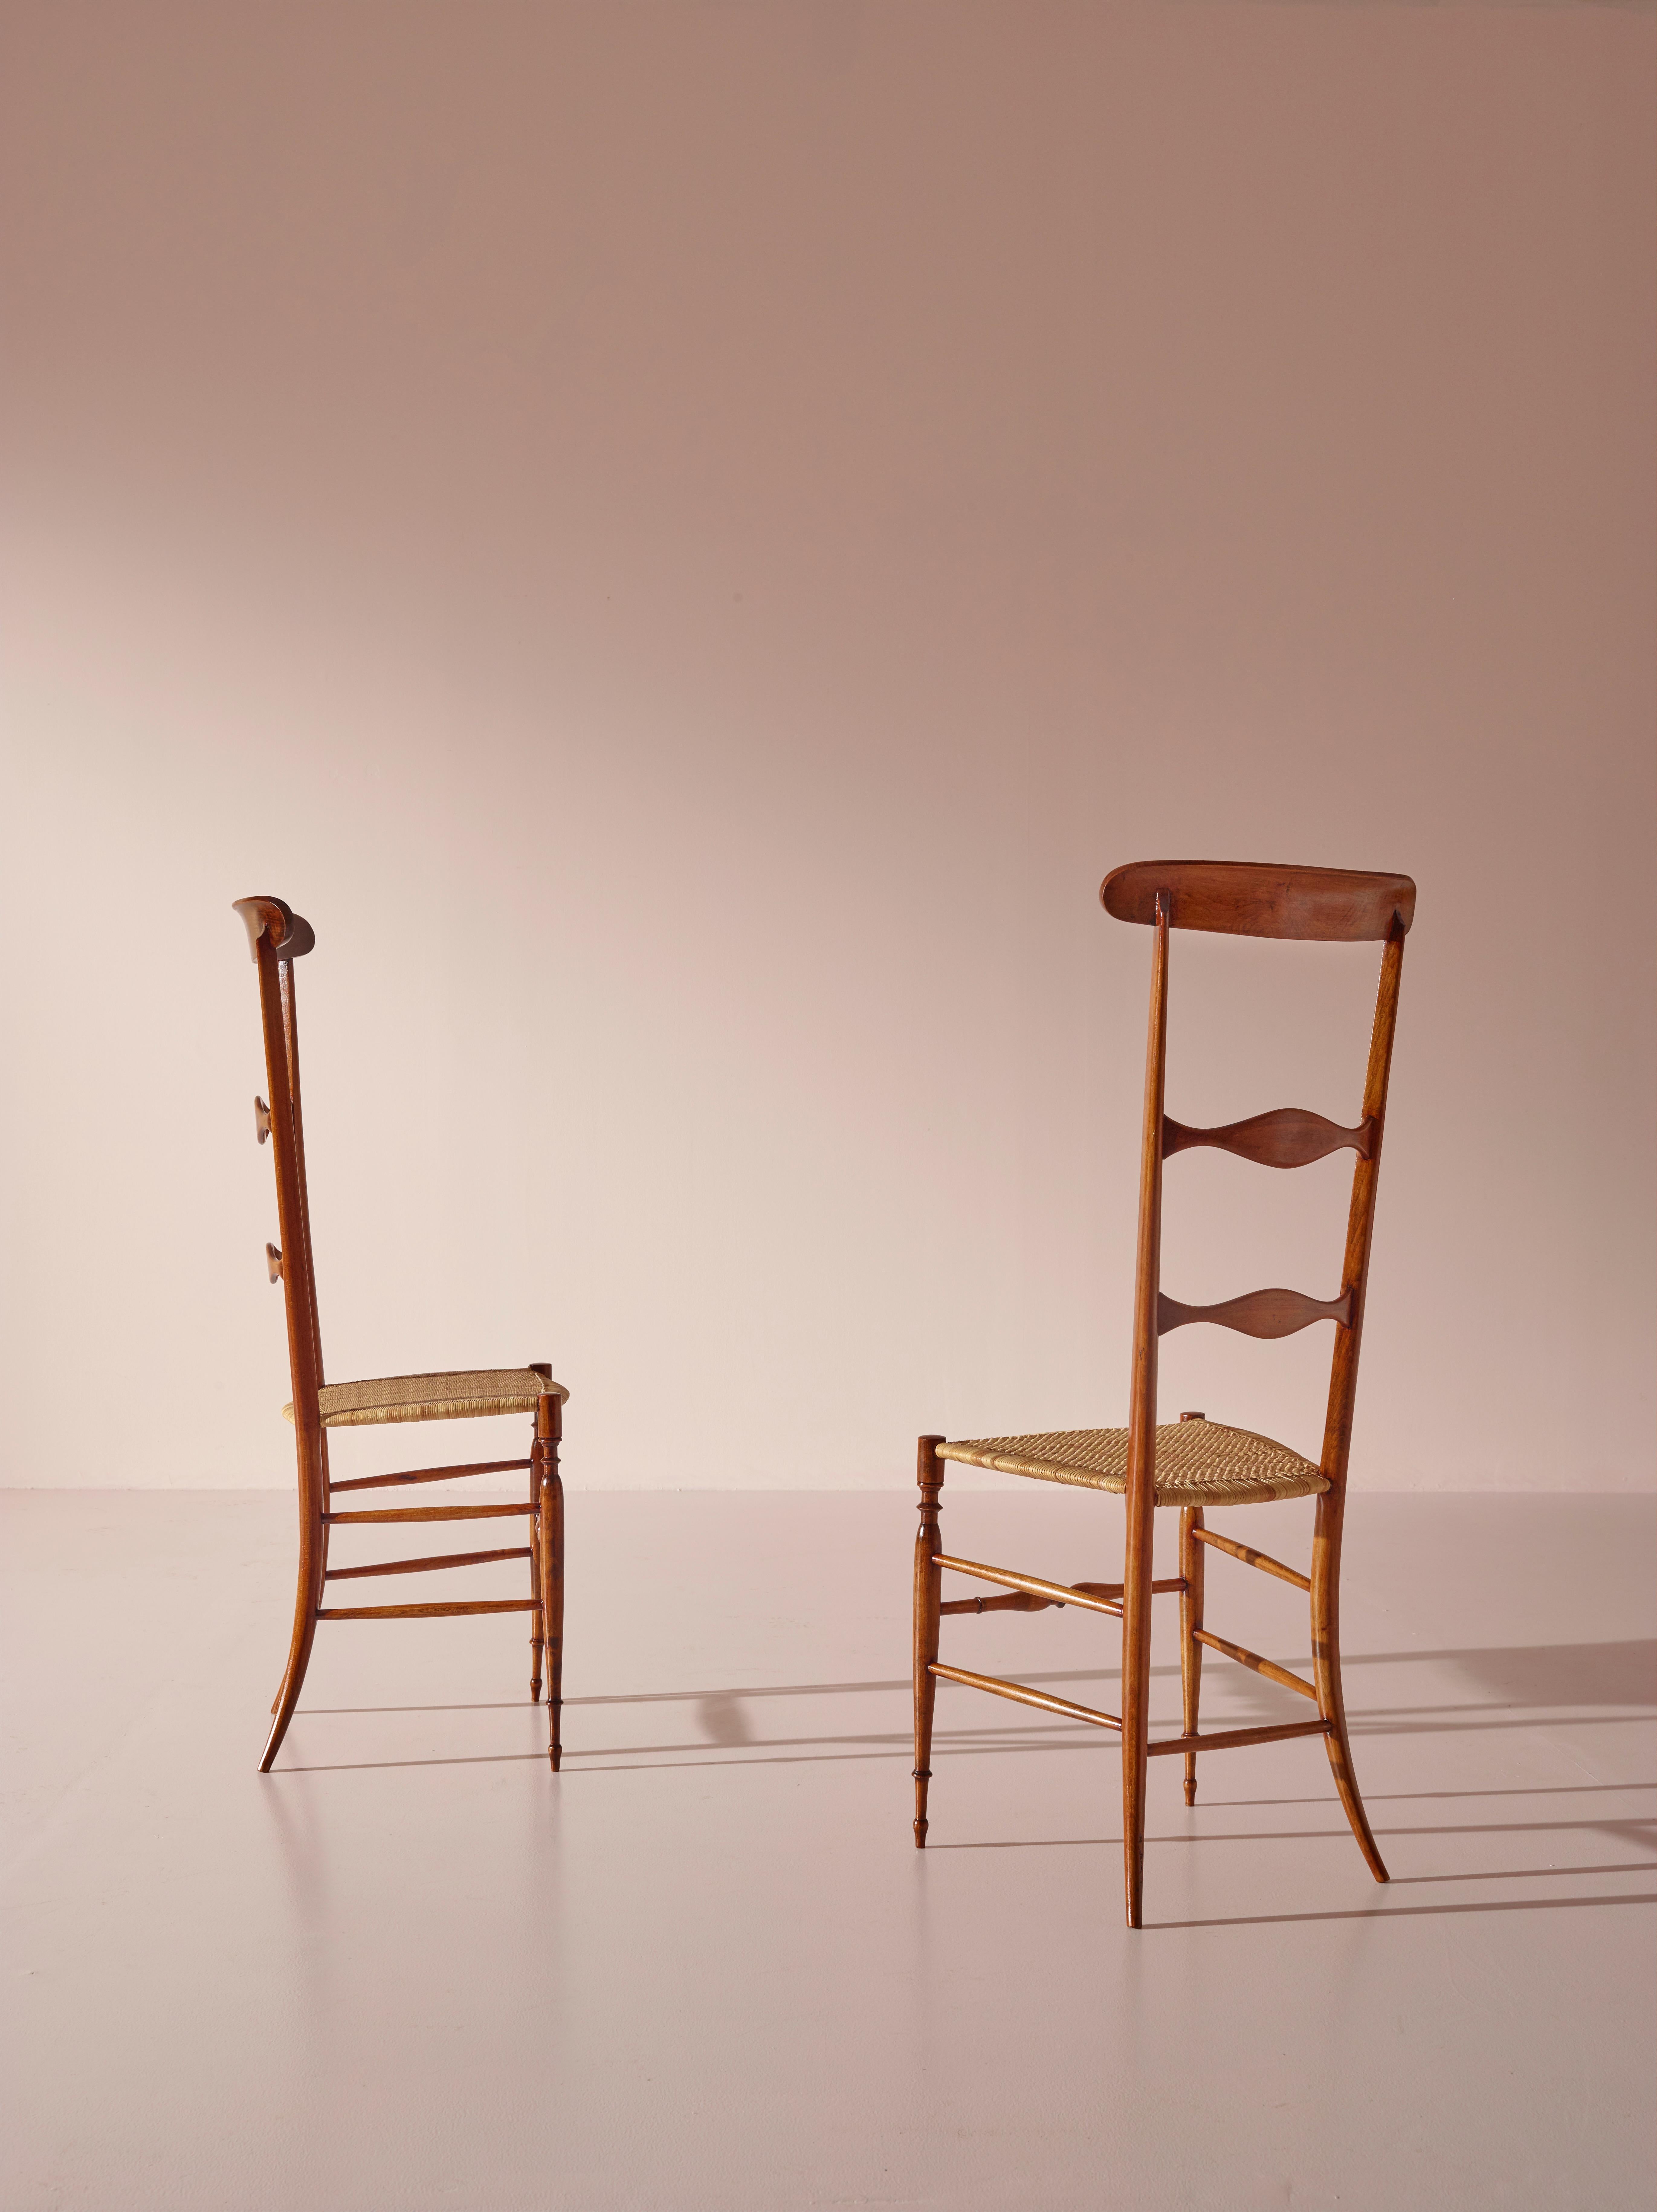 Cane Pair of Campanino High Back Chairs Produced by Sabbadini, Chiavari, Italy, 1960s For Sale